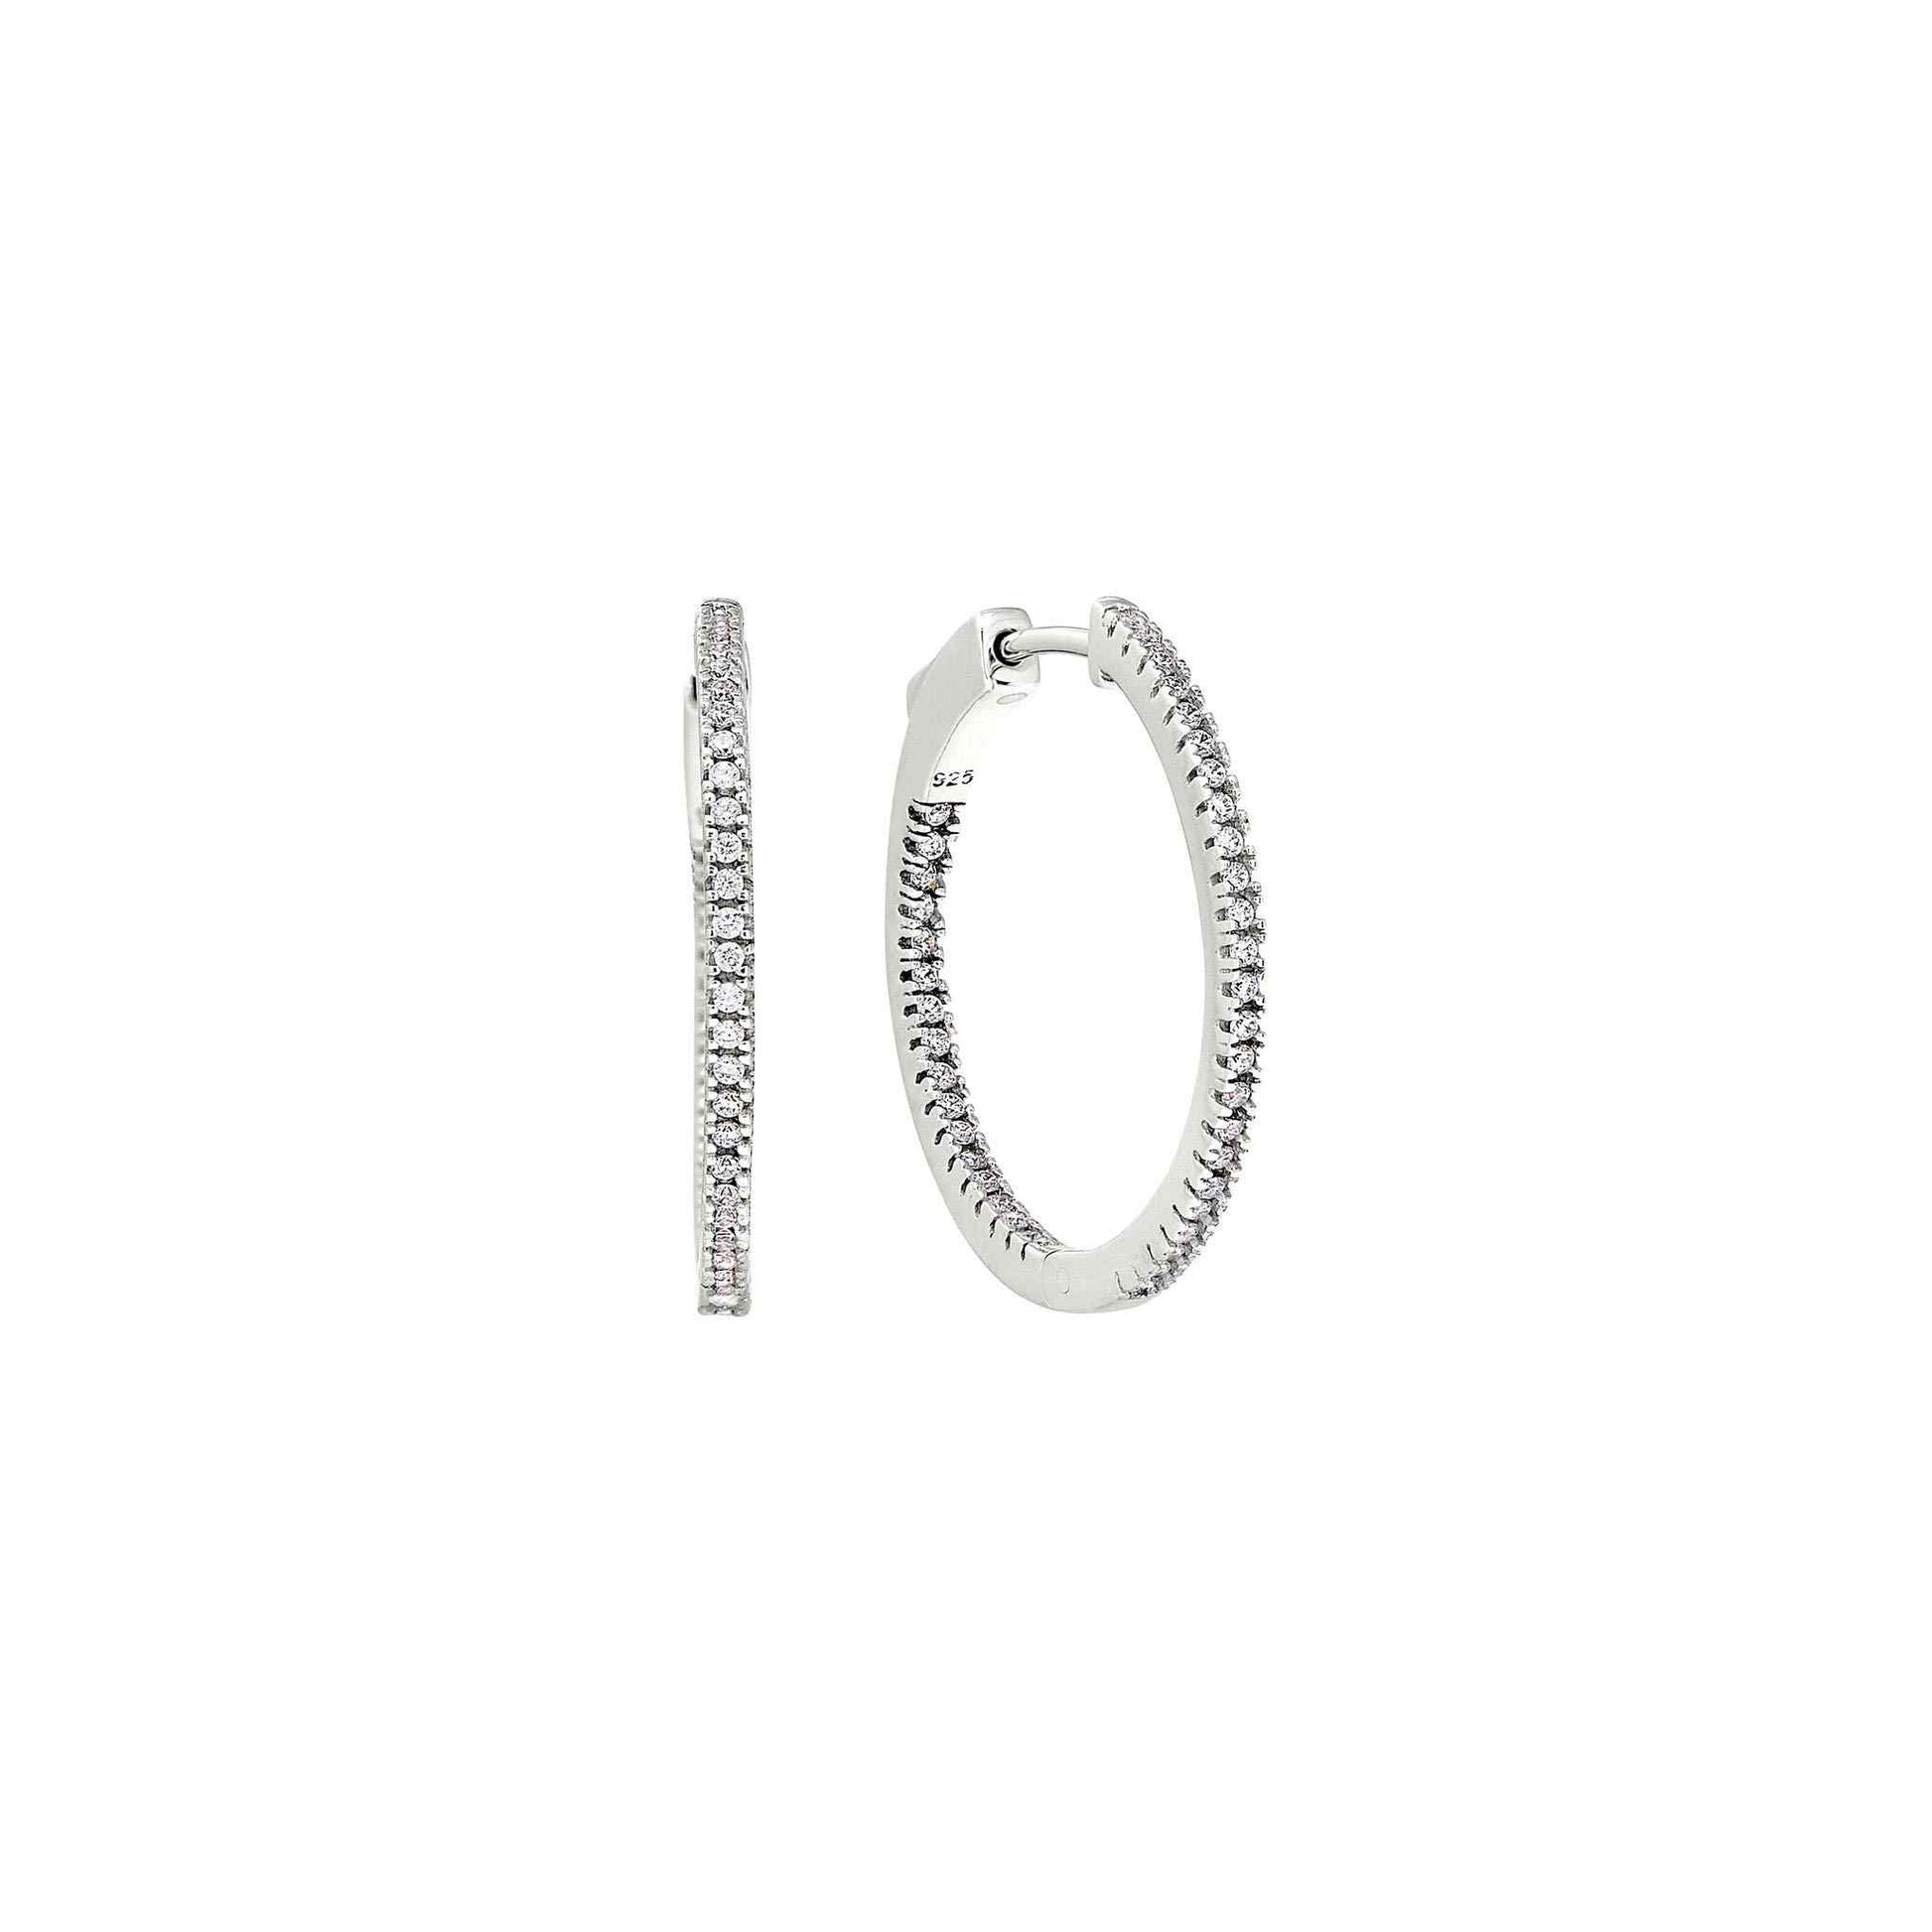 A inside out medium hoop earrings with simulated diamonds displayed on a neutral white background.